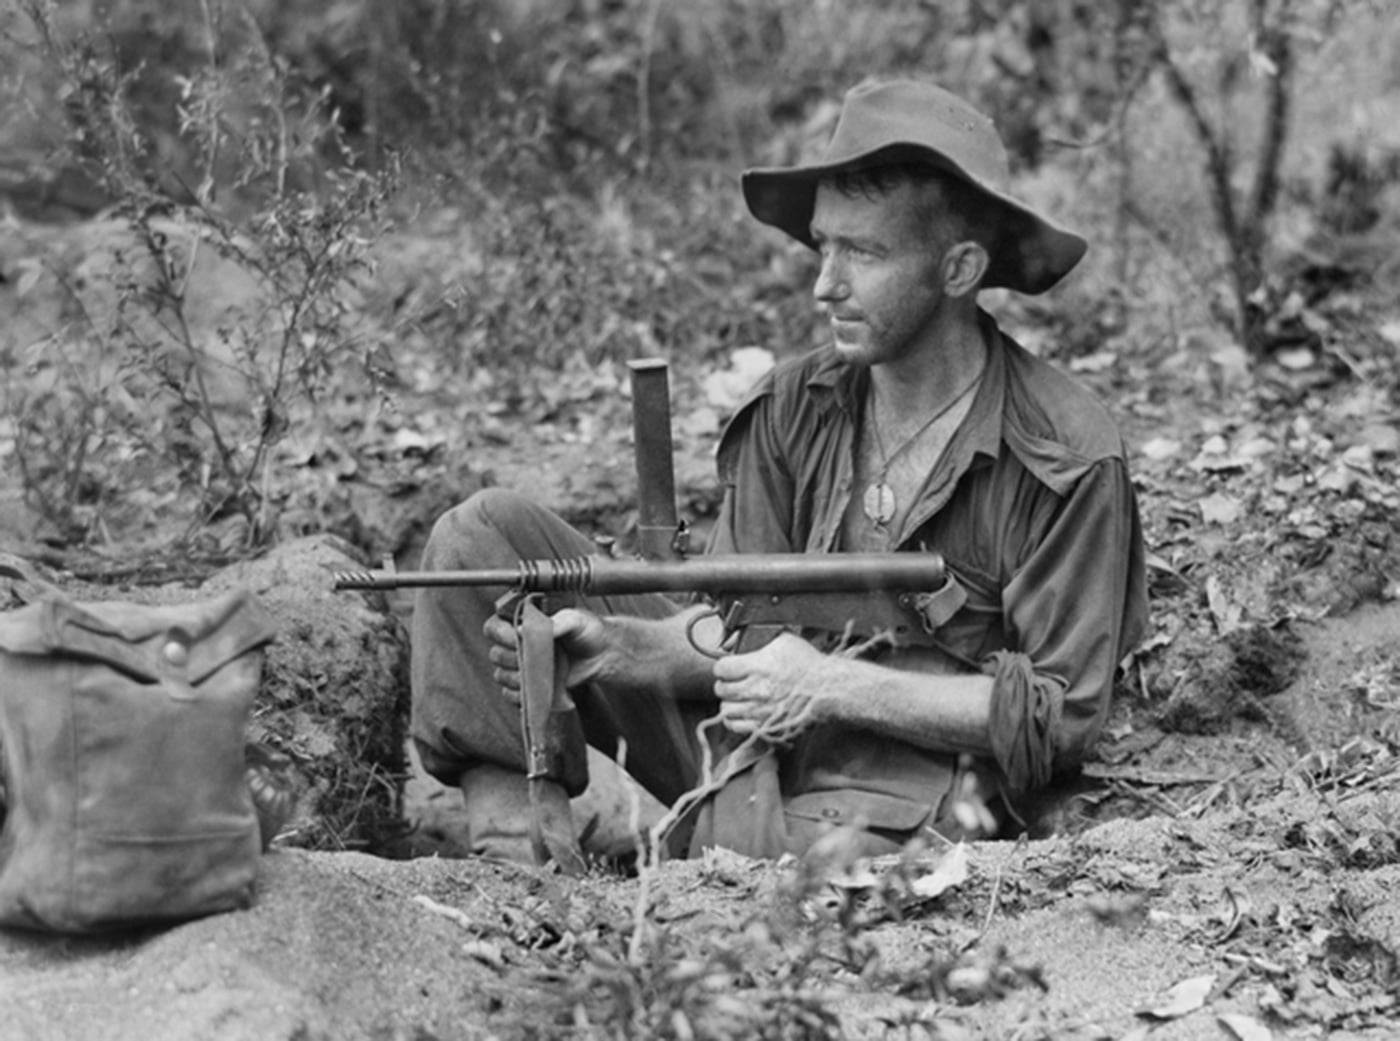 In this photo from New Guinea of an Australian soldier with his Owen SMG in WWII.